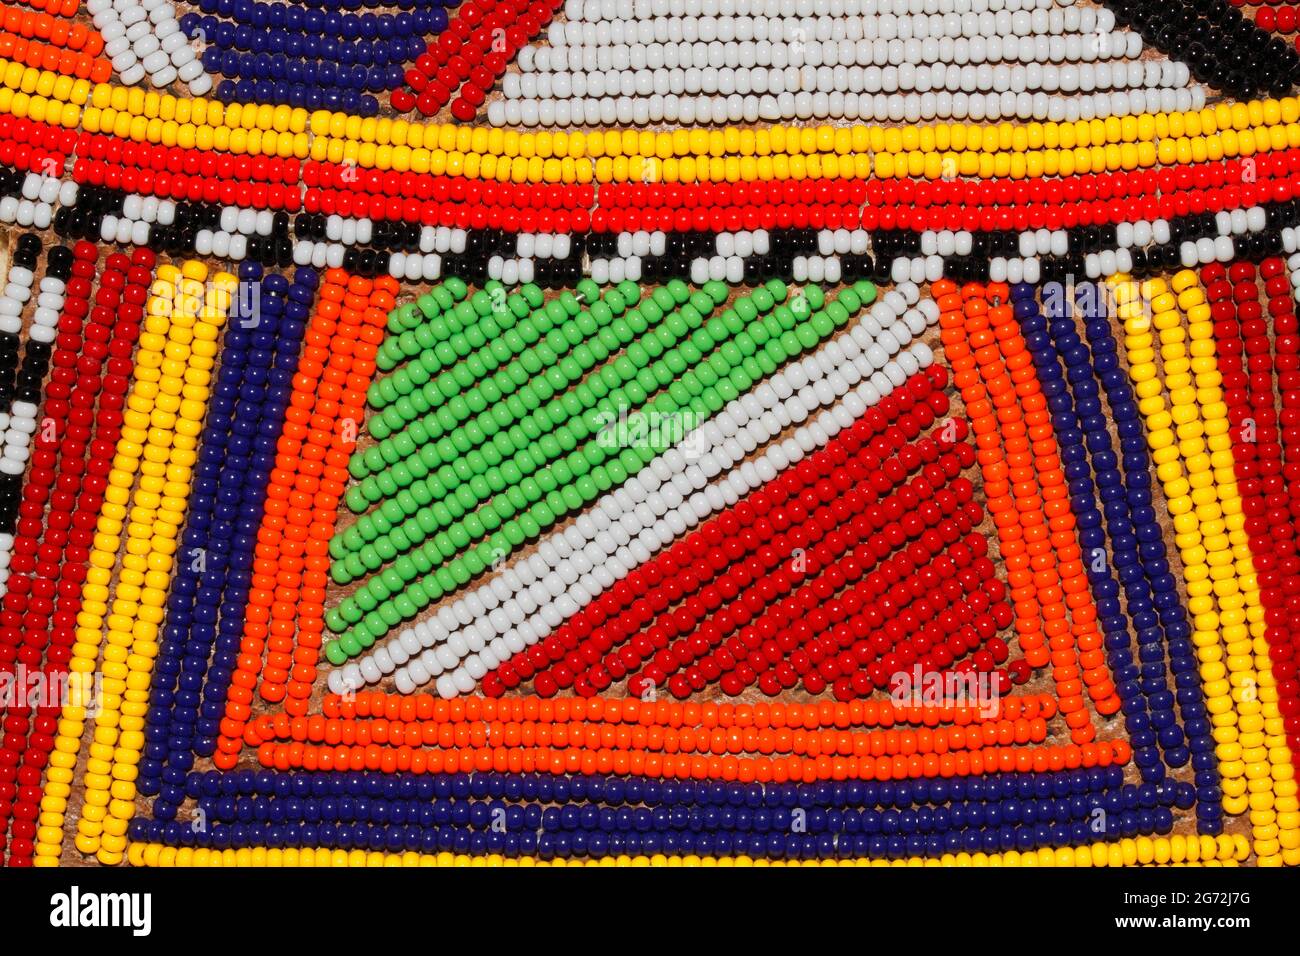 Background of colorful African beads used as decoration by the Masai tribe in Kenya Stock Photo